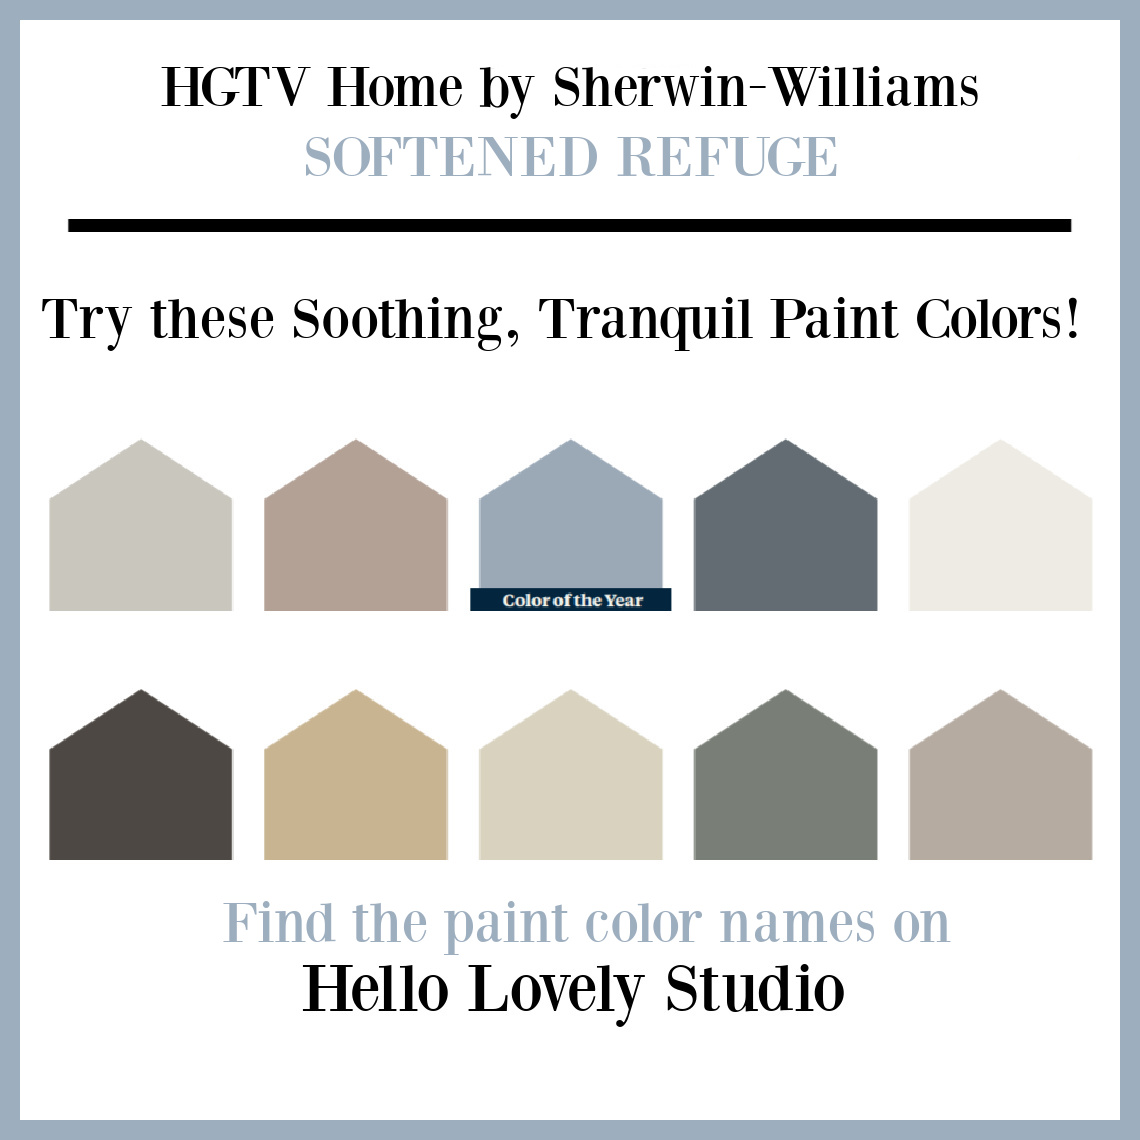 Softened Refuge Color Collection of paint colors for 2022 by HGTV Home by Sherwin-Williams - come find these ideas for tranquil paint colors to soothe!